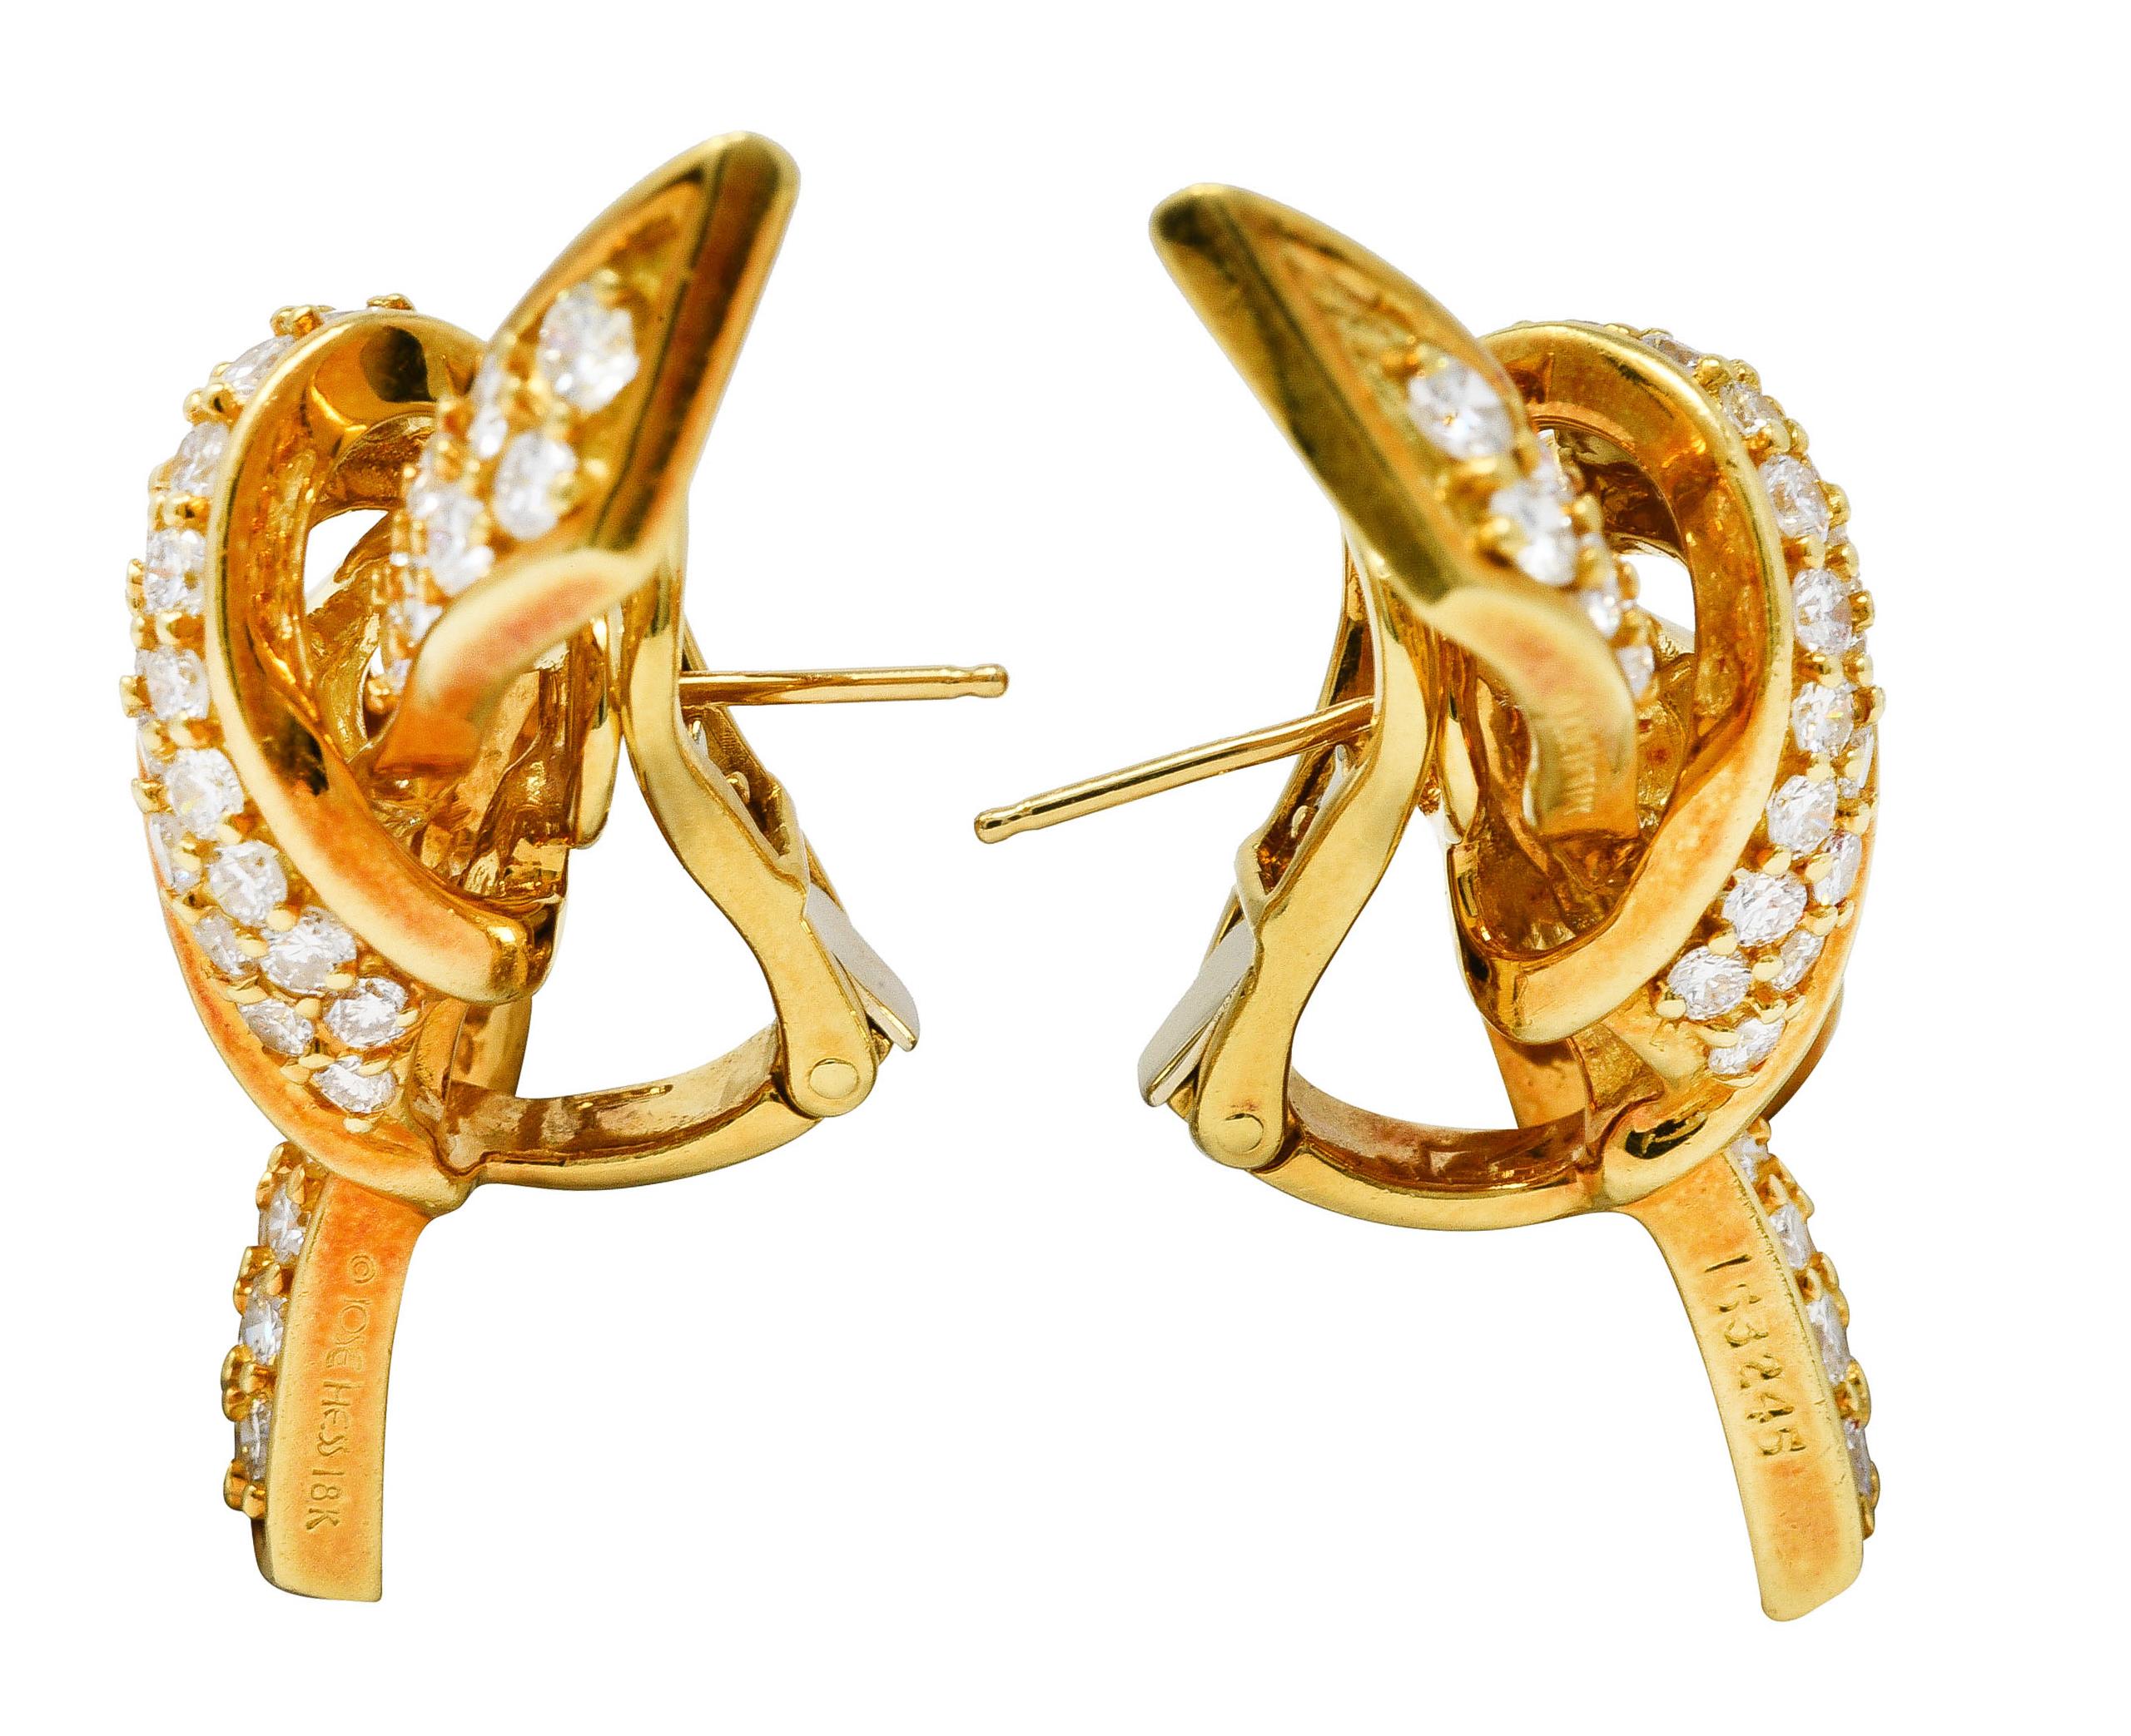 Earrings are designed as twisted gold knots - oriented North to South. Pavè set throughout by round brilliant cut diamonds. Weighing in total approximately 3.45 carats - F/G color with VS2 to SI1 clarity. Completed by posts with hinged omega backs.